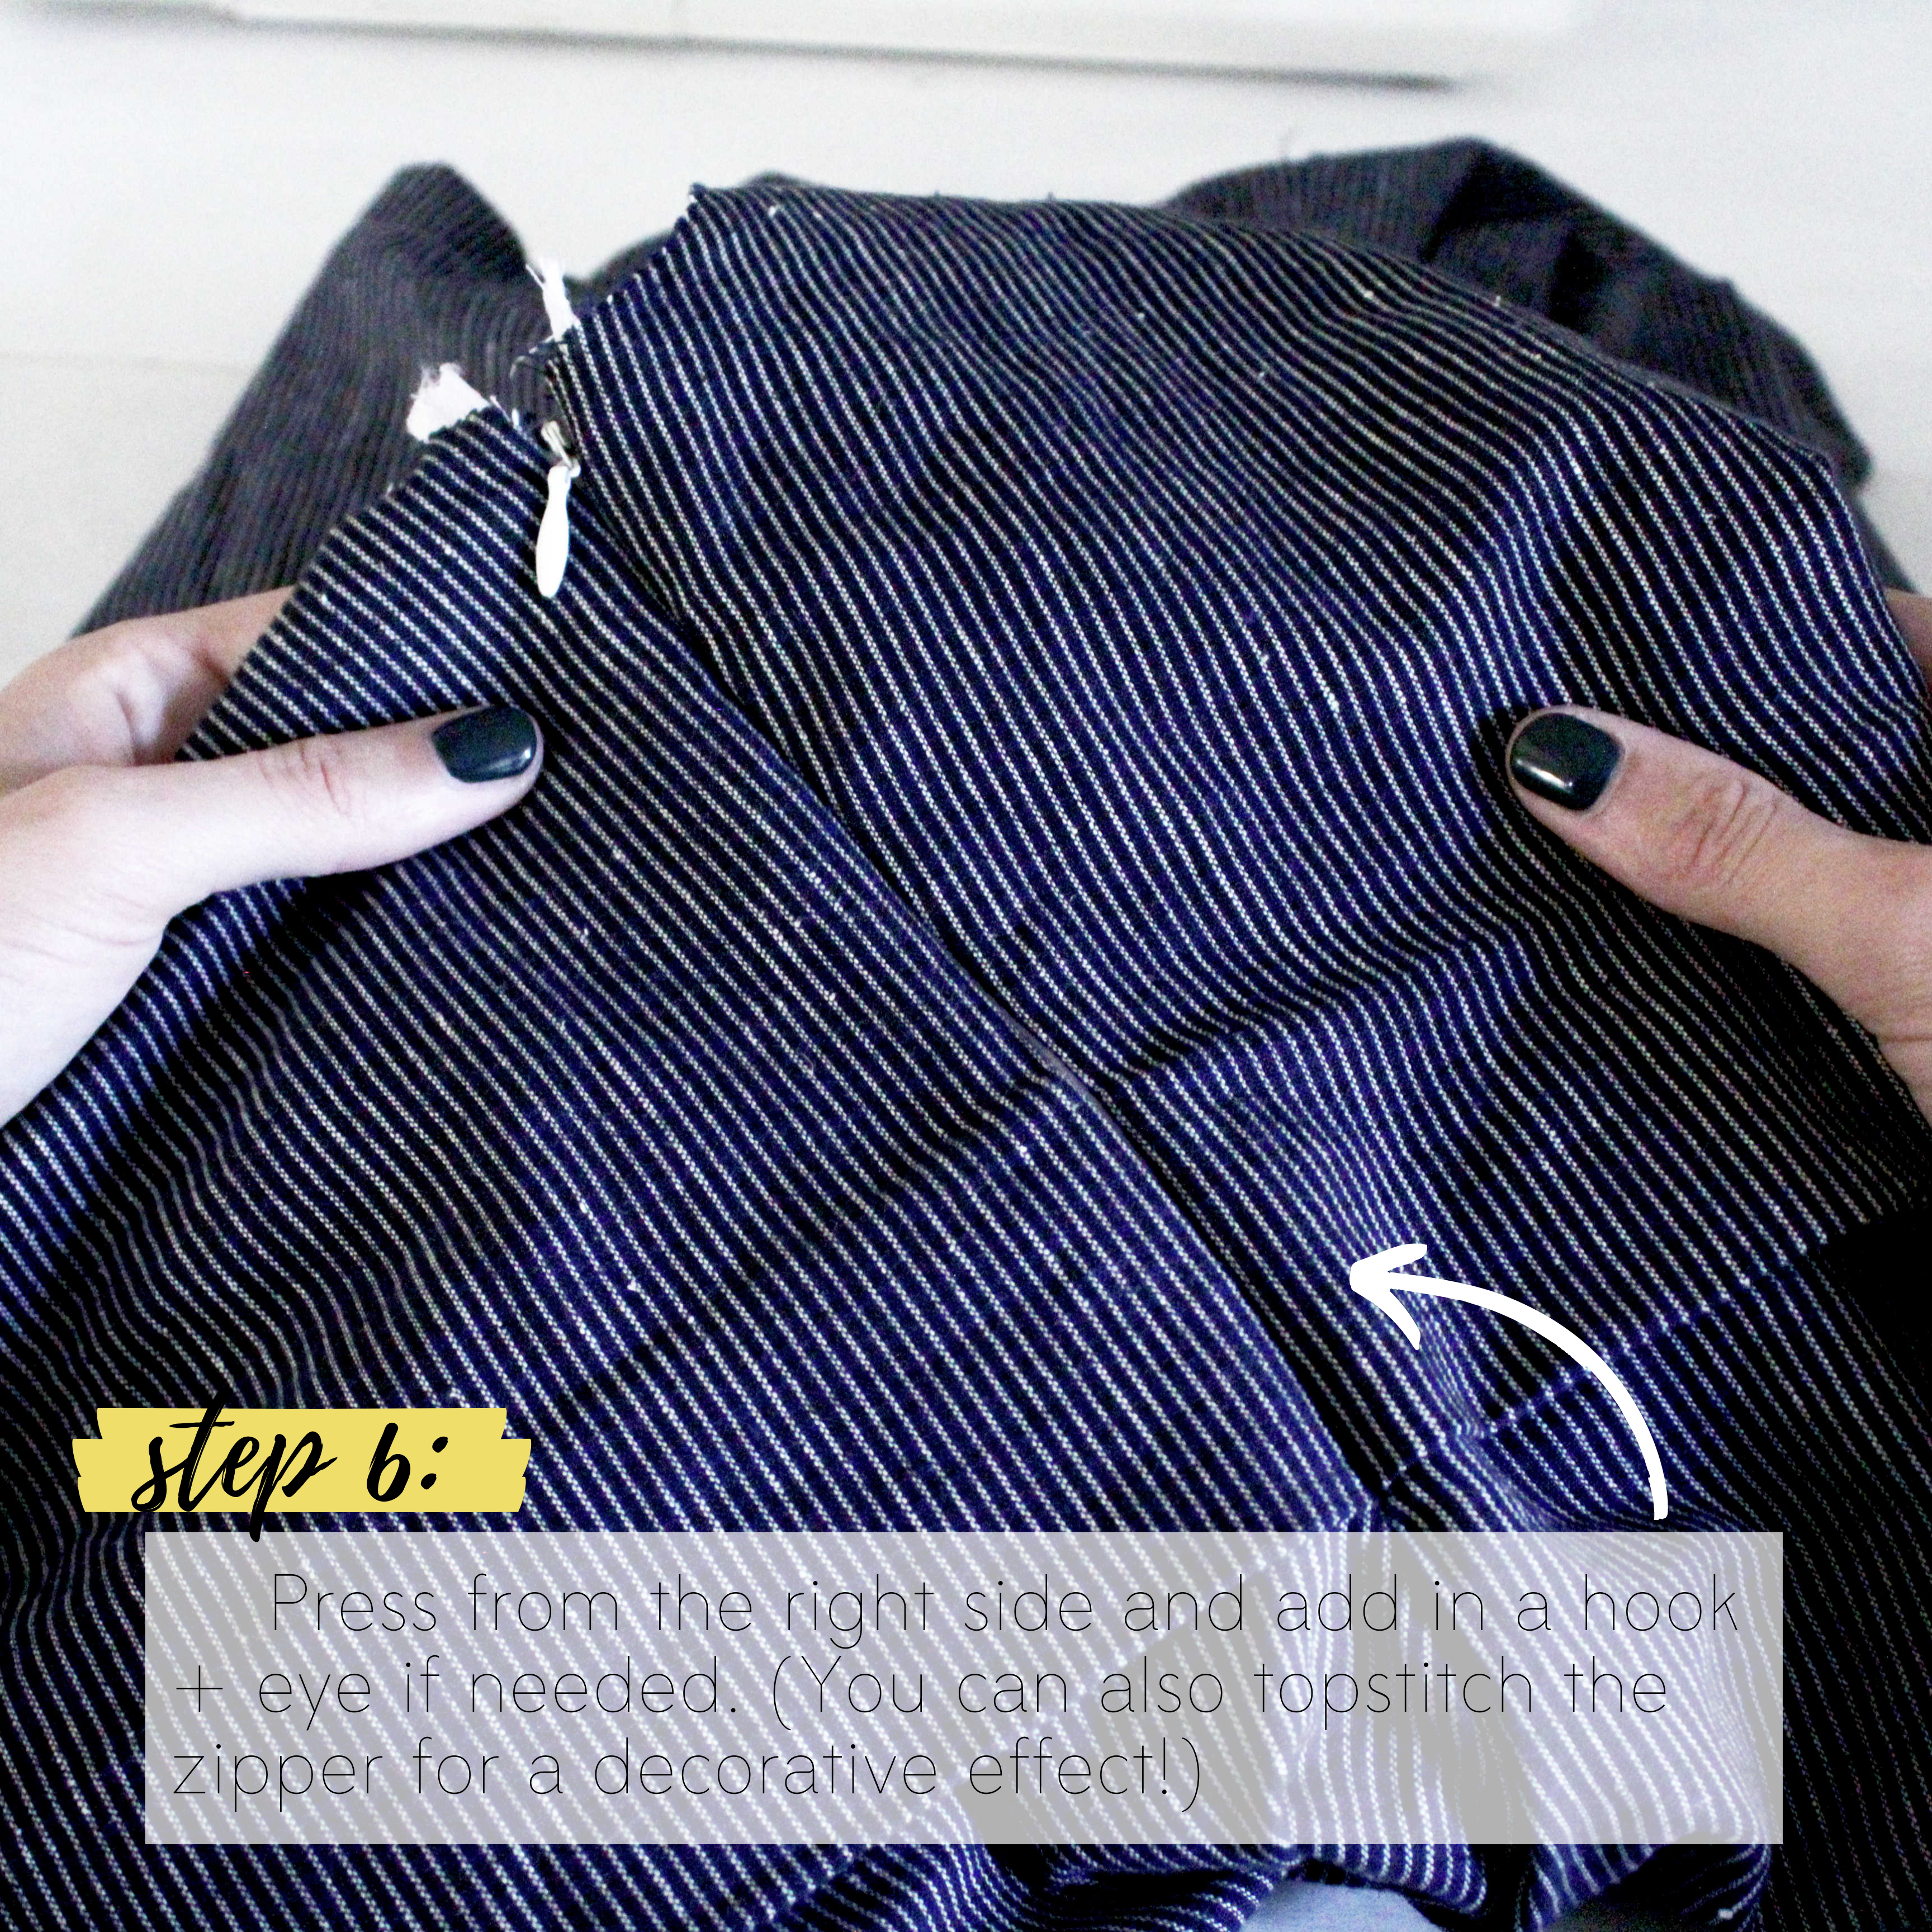 How To Sew An Invisible Zipper Sewing Tutorial: Step 6